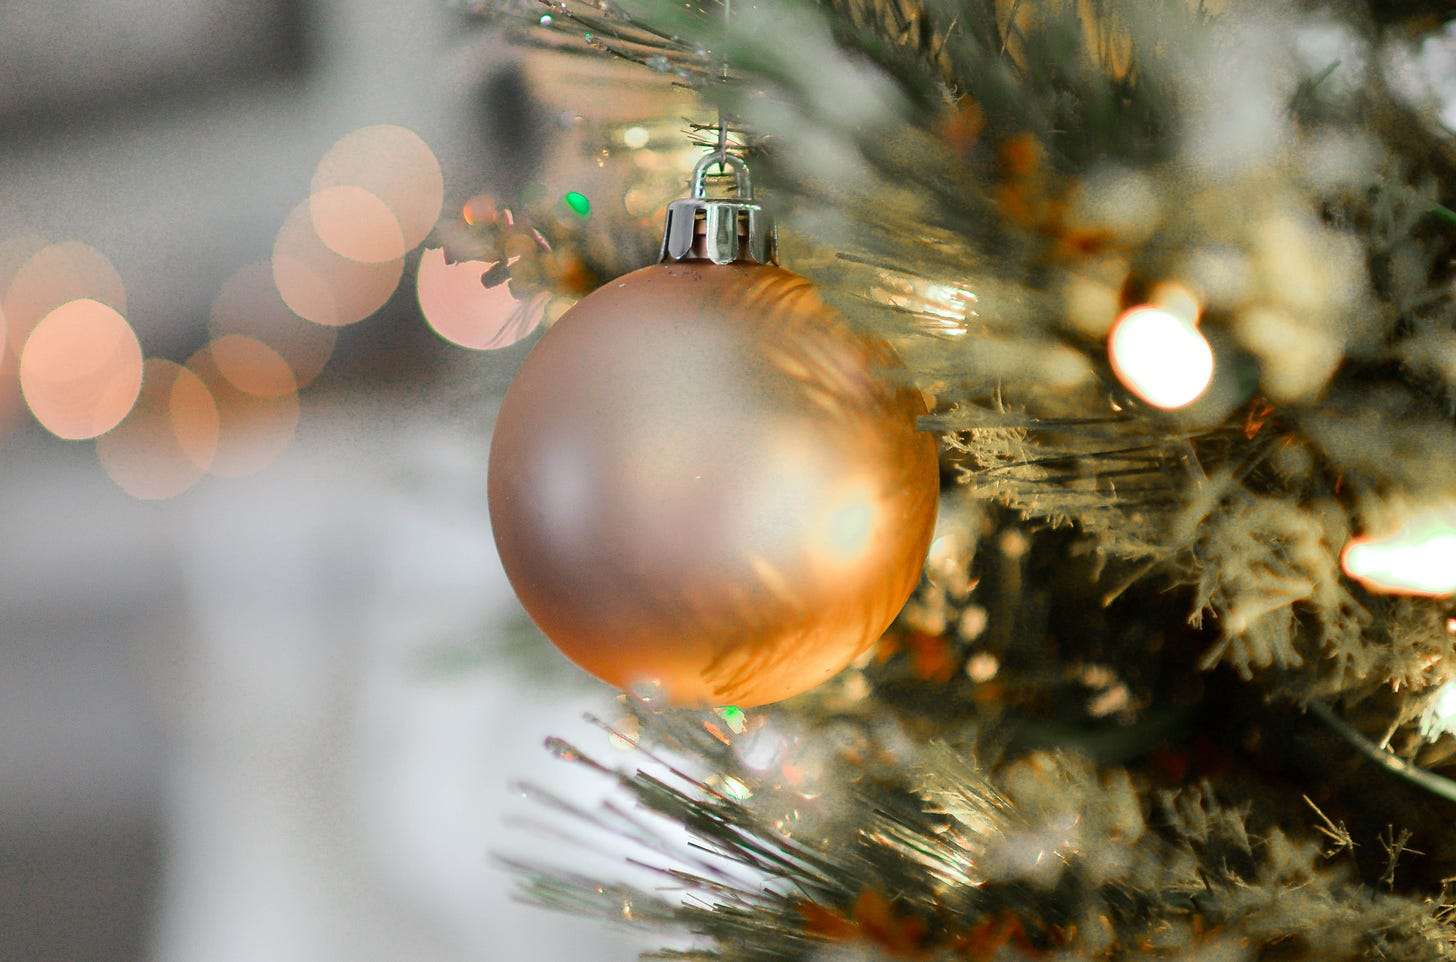 A gold Christmas bauble hangs on some greenery that also have twinkling lights festooned throughout.